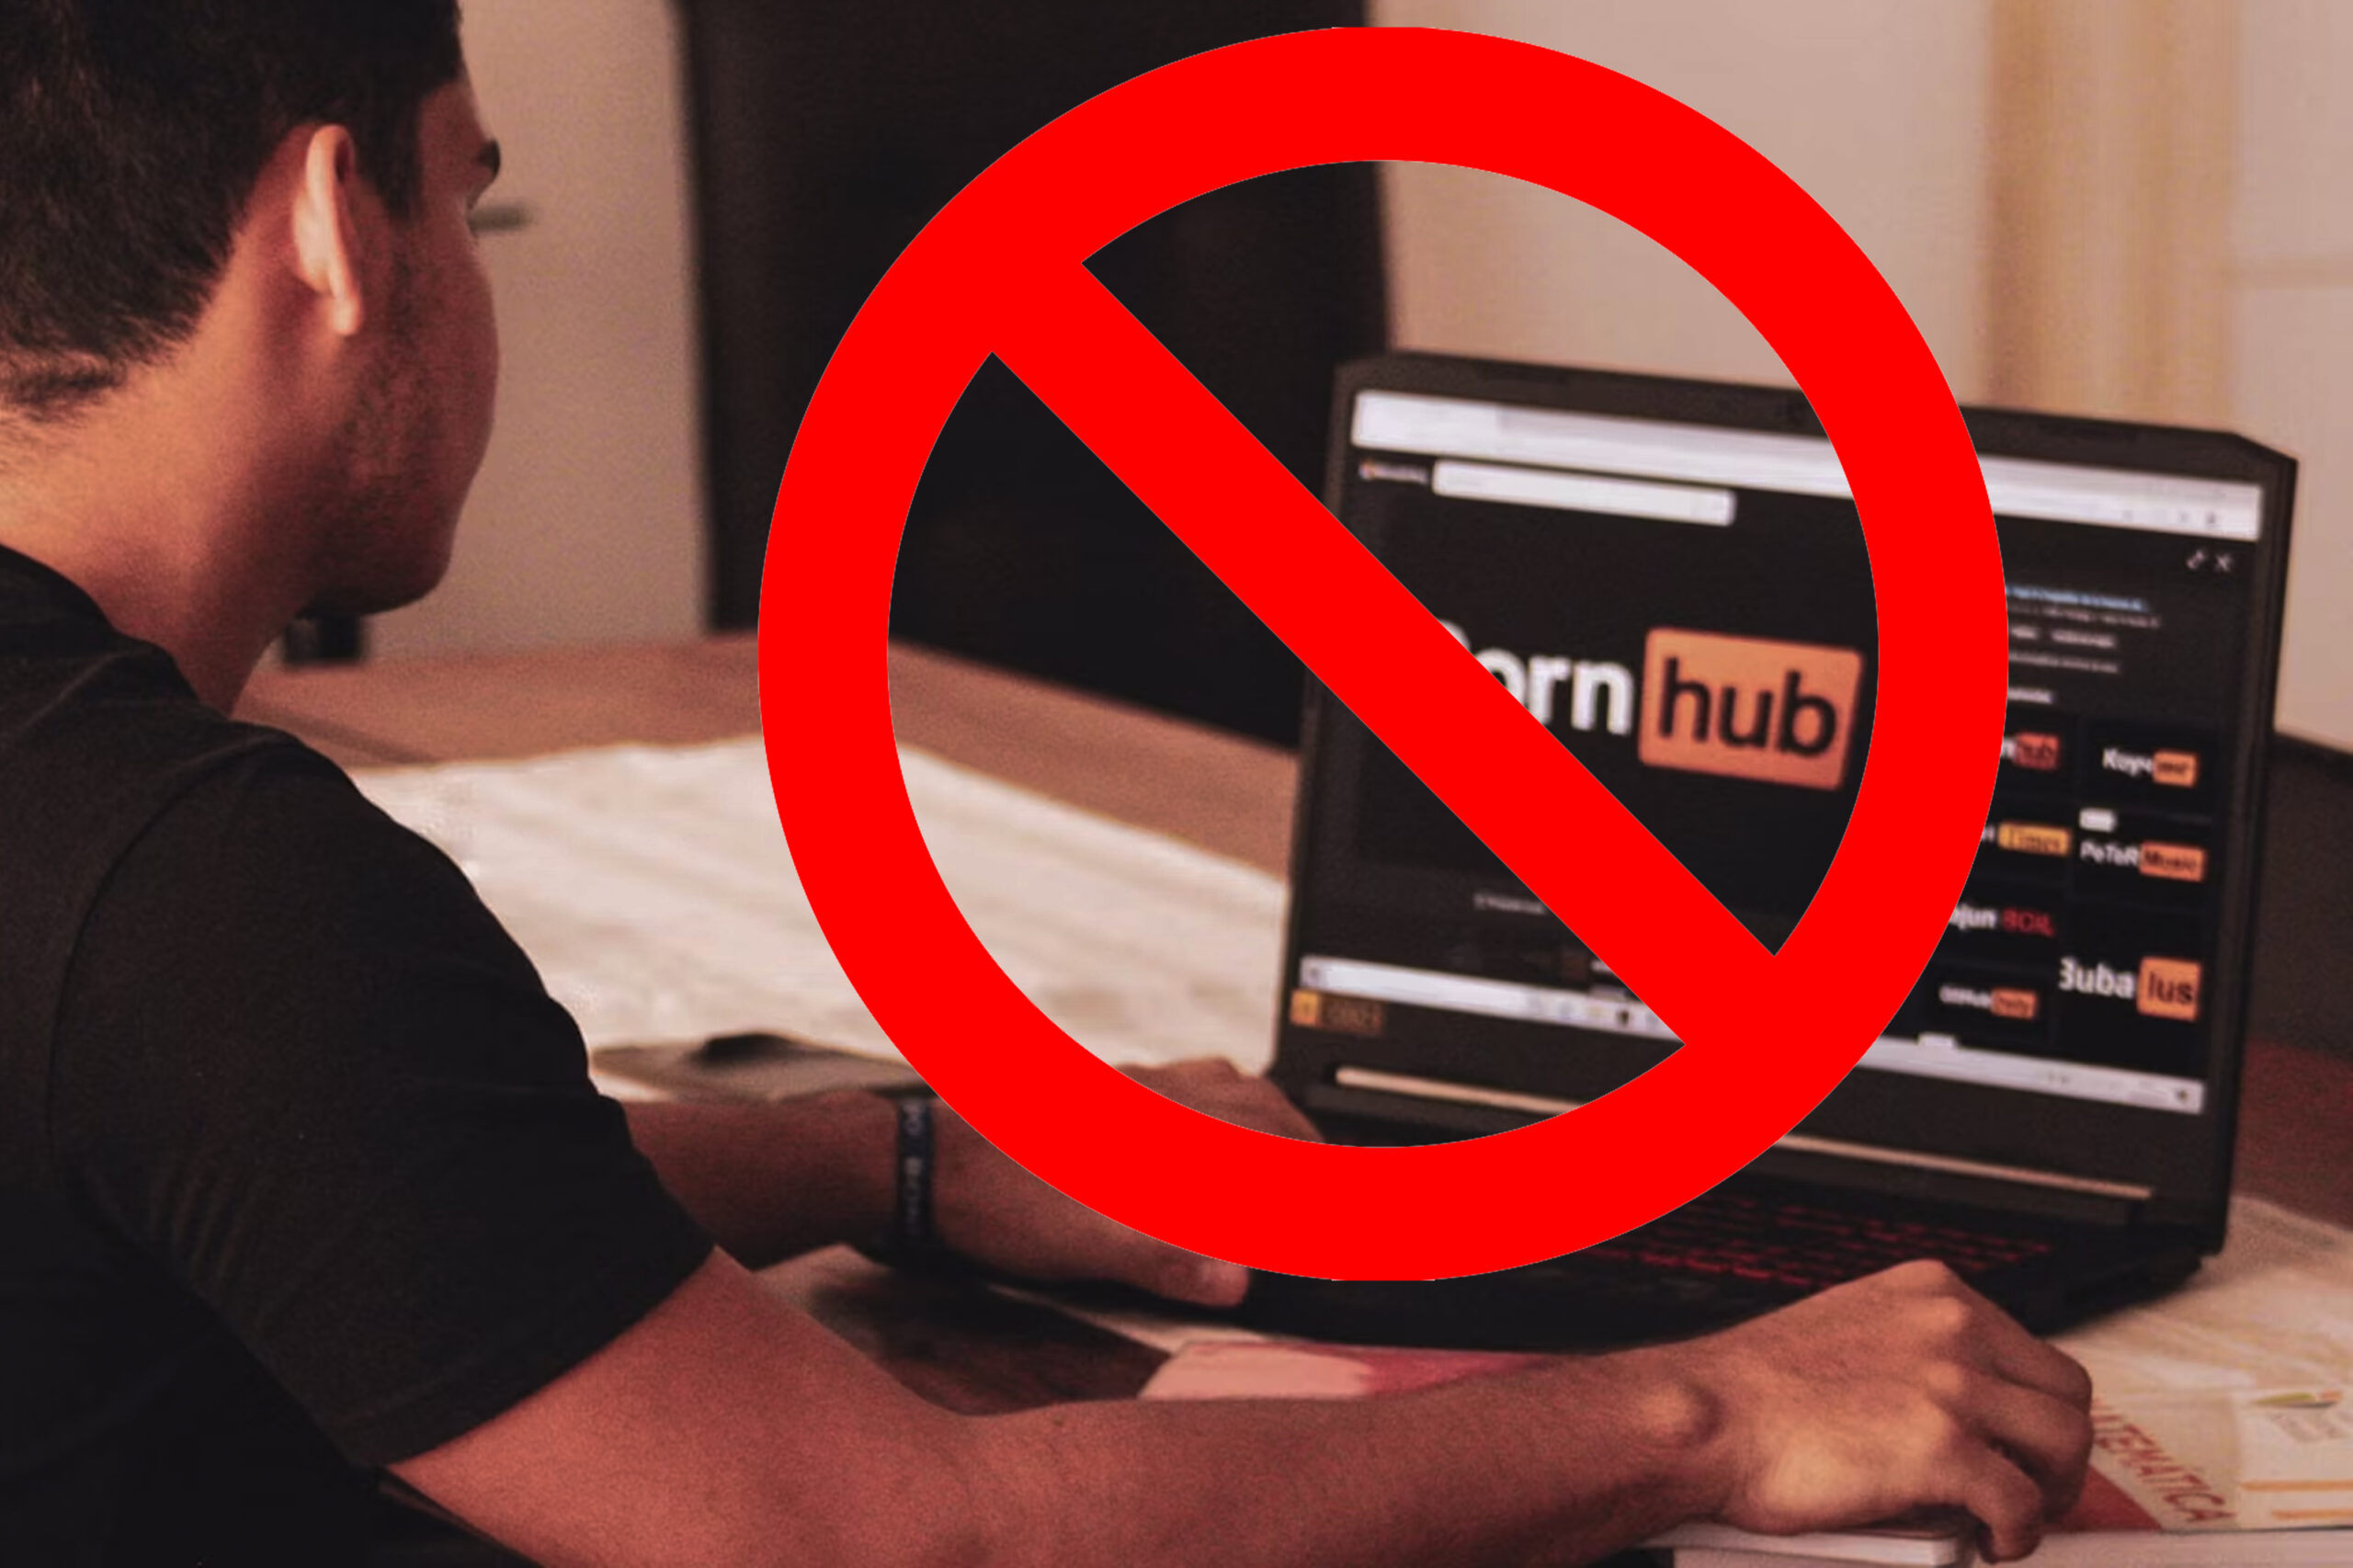 Vornhub - Pornhub Blocks Access In Utah Because of State's New Age Verification Law -  RELEVANT